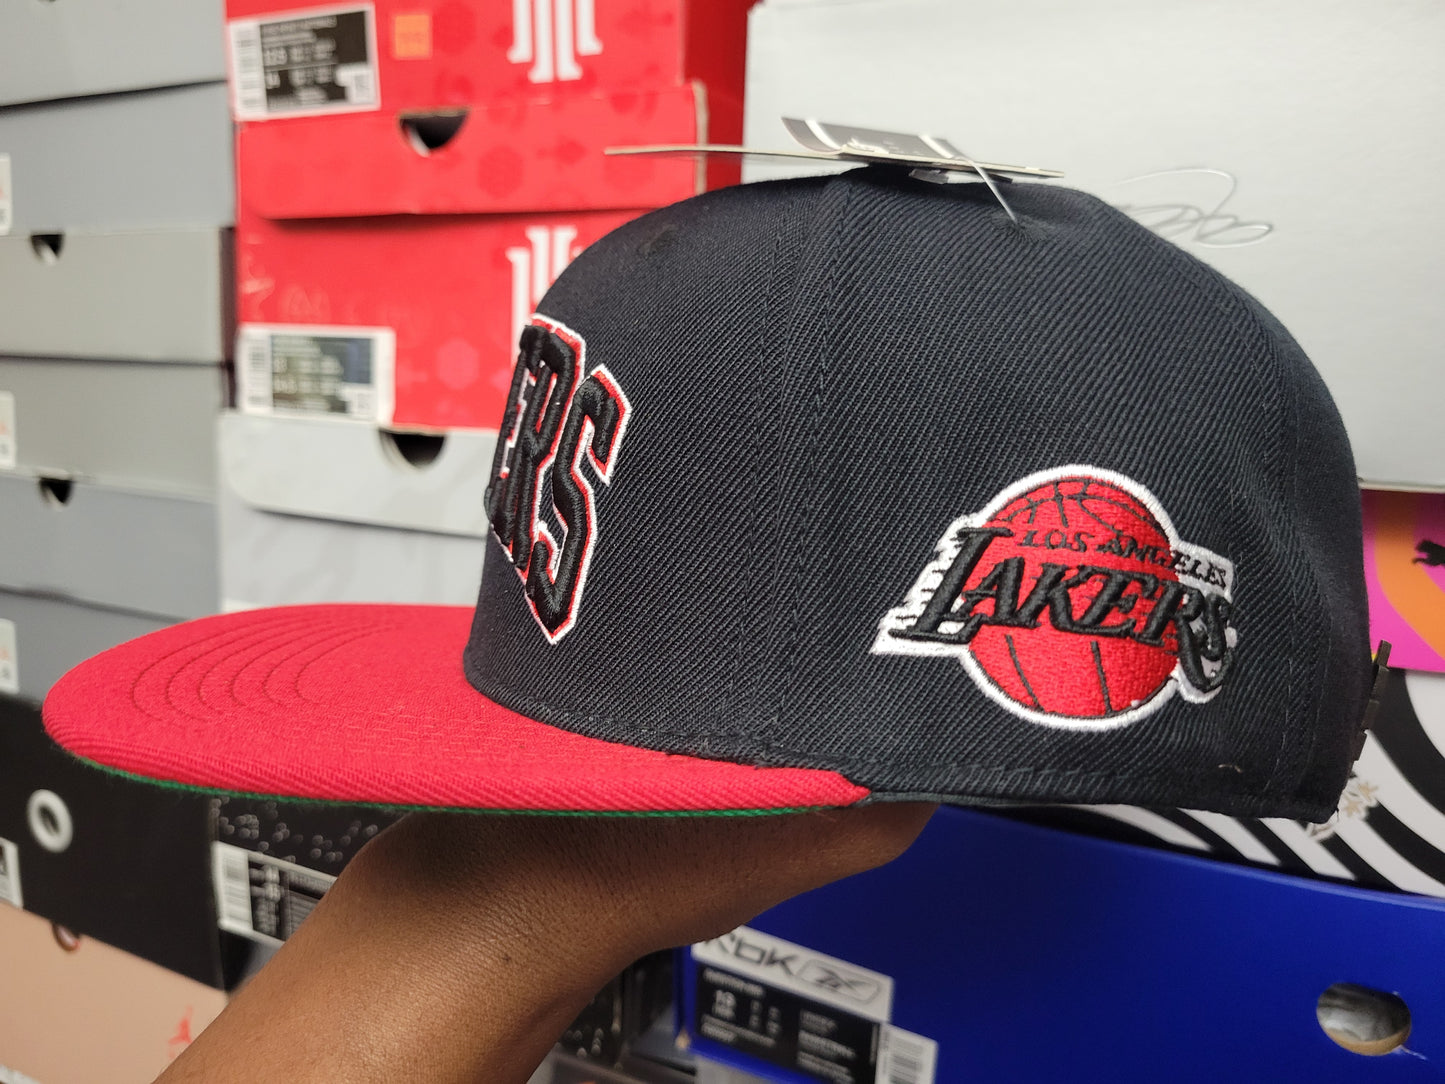 Pro Standard Lakers Blk/Red Snapback